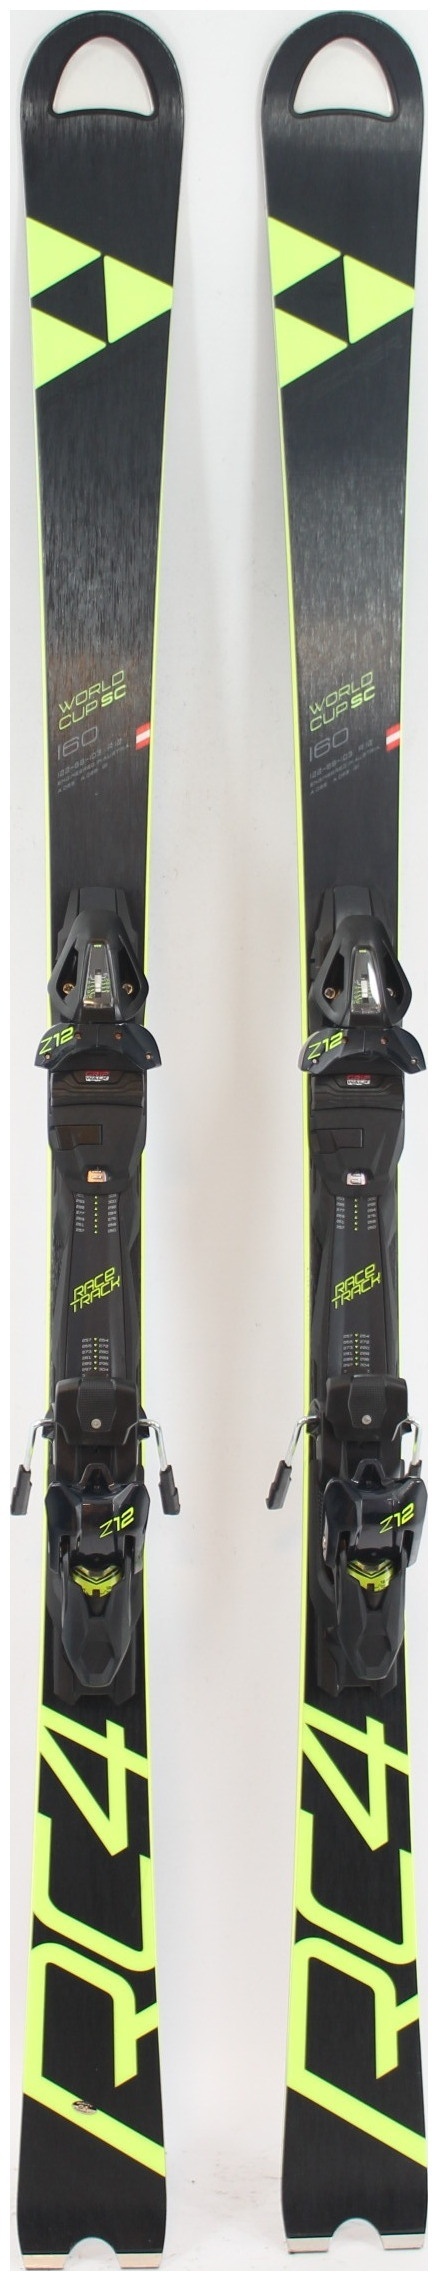 2019, Fischer, RC4 Worldcup SC Skis with Fischer Z12 RaceTrack Bindings  Used Demo Skis 160cm